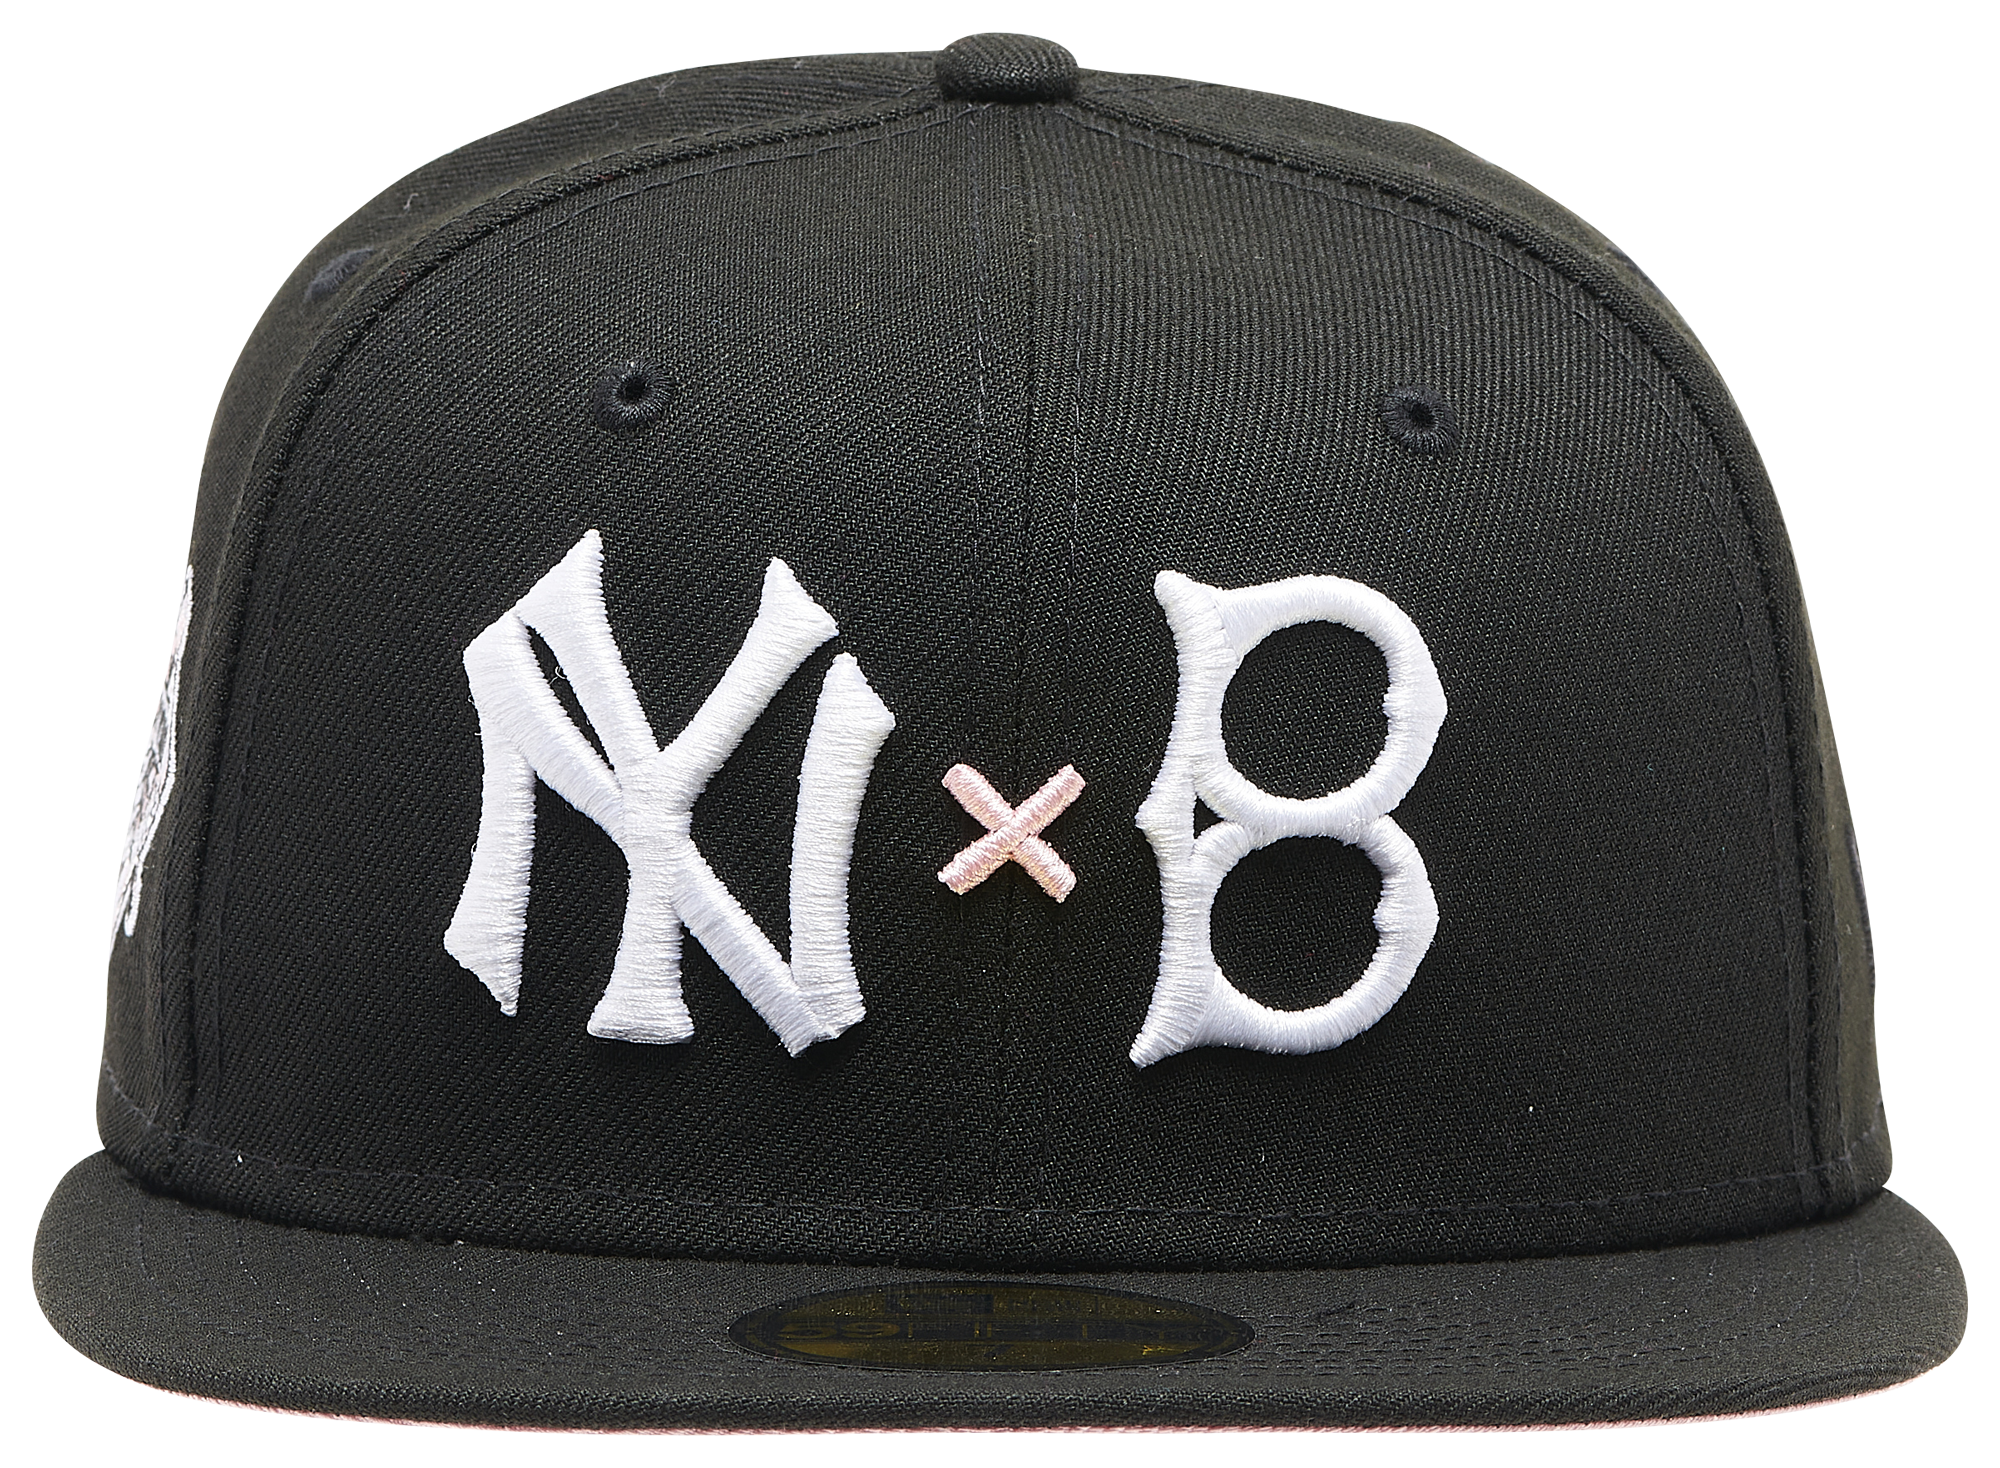 New Era Yankees 59Fifty Dueling Fitted Cap